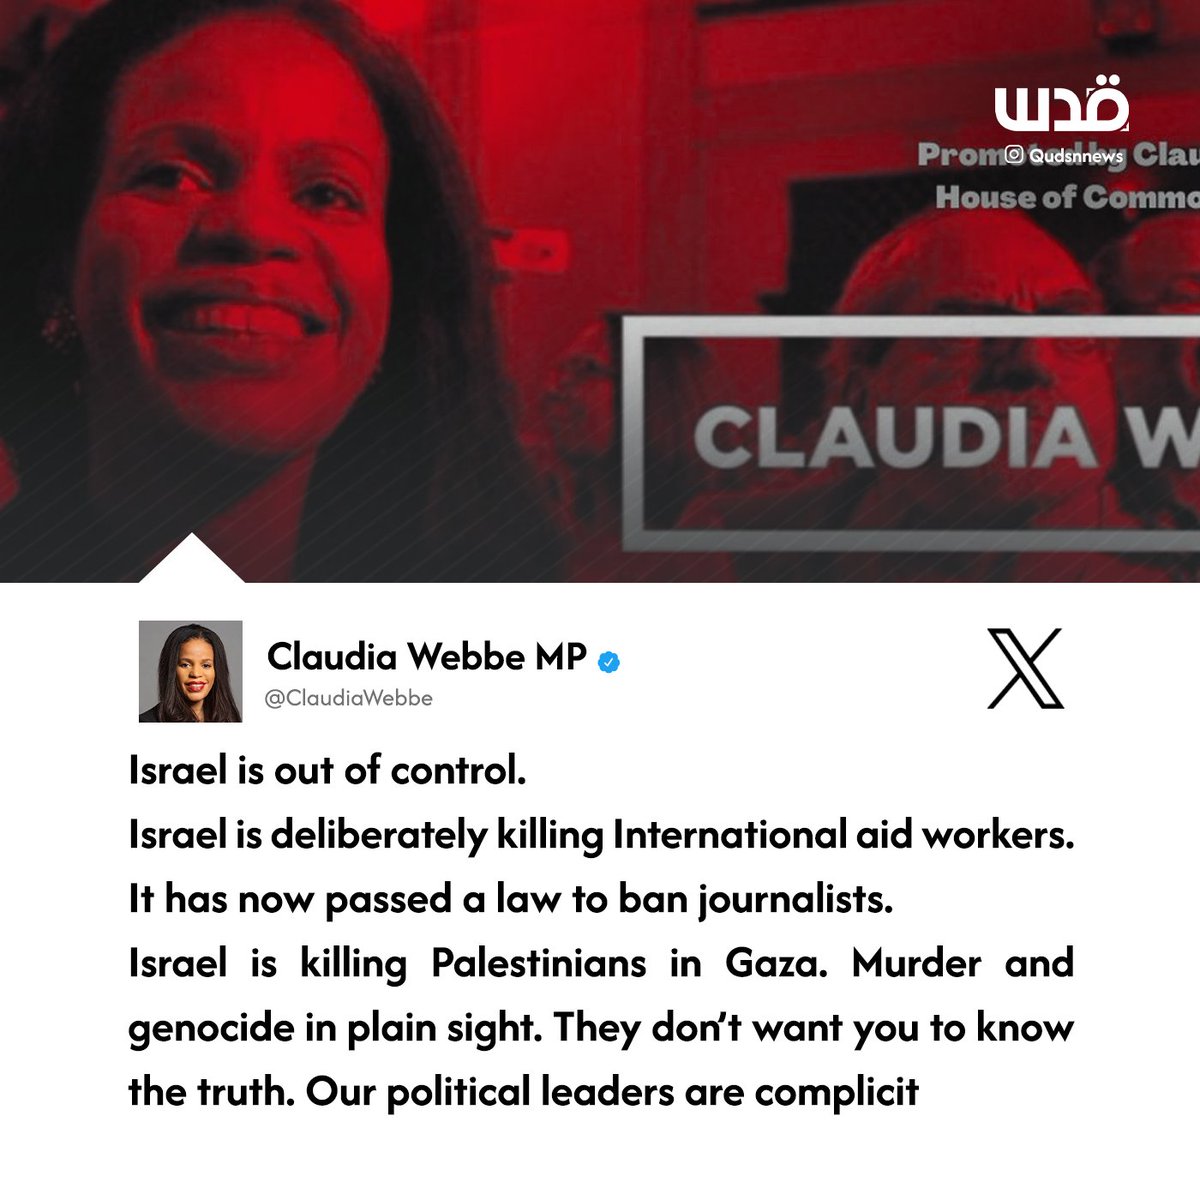 British MP Claudia Webbe: 'Israel is deliberately killing international aid workers. Israel is killing Palestinians, murder and genocide in plain sight. They don't want you to know the truth. Our political leaders are complicit.'